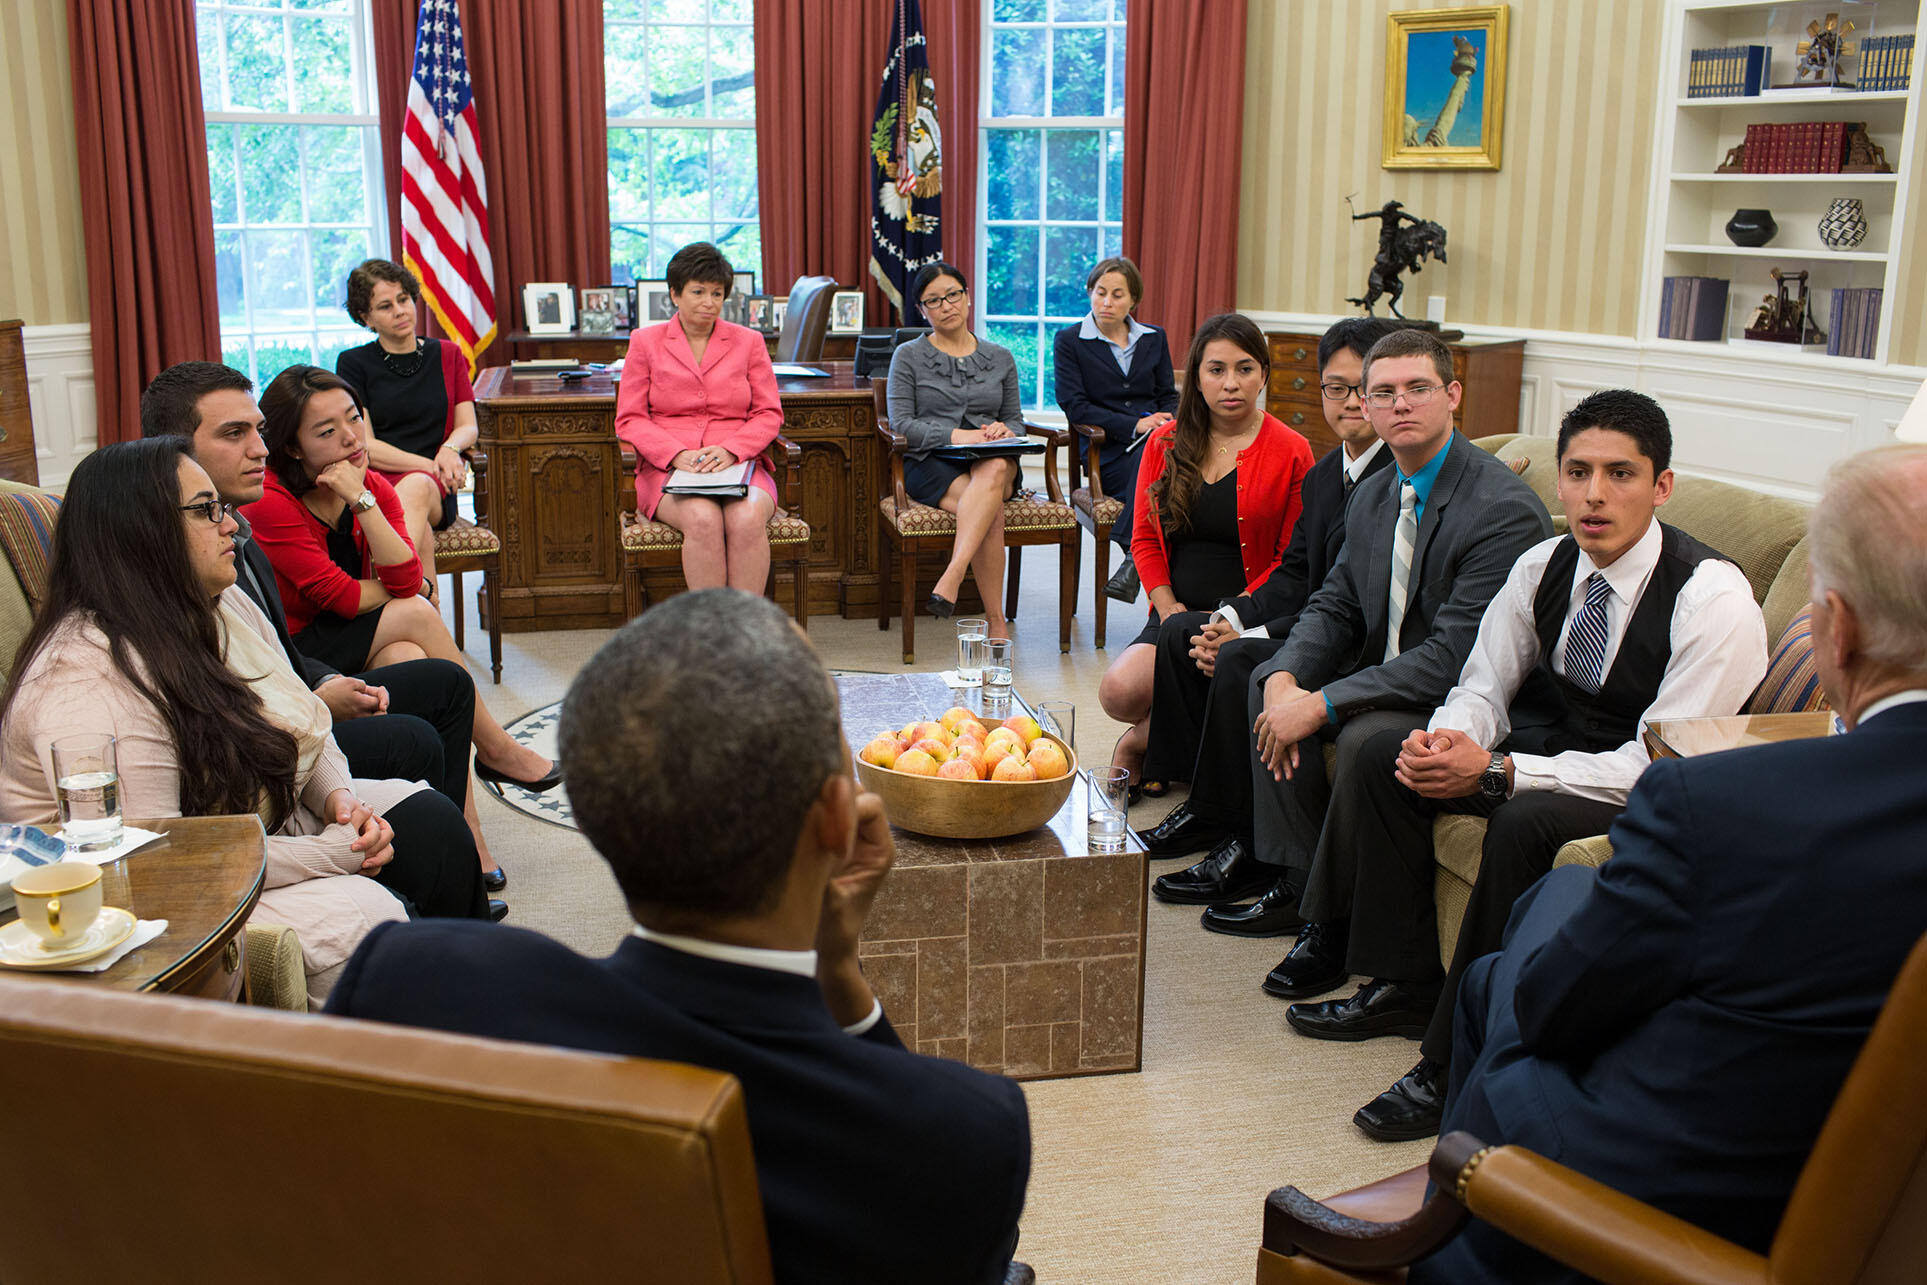 President Obama and Vice President Biden meet with DREAMers who have received Deferred Action and U.S. citizen family members of undocumented immigrants in the Oval Office, May 2013. (Photo by Pete Souza/Official White House Photo.)